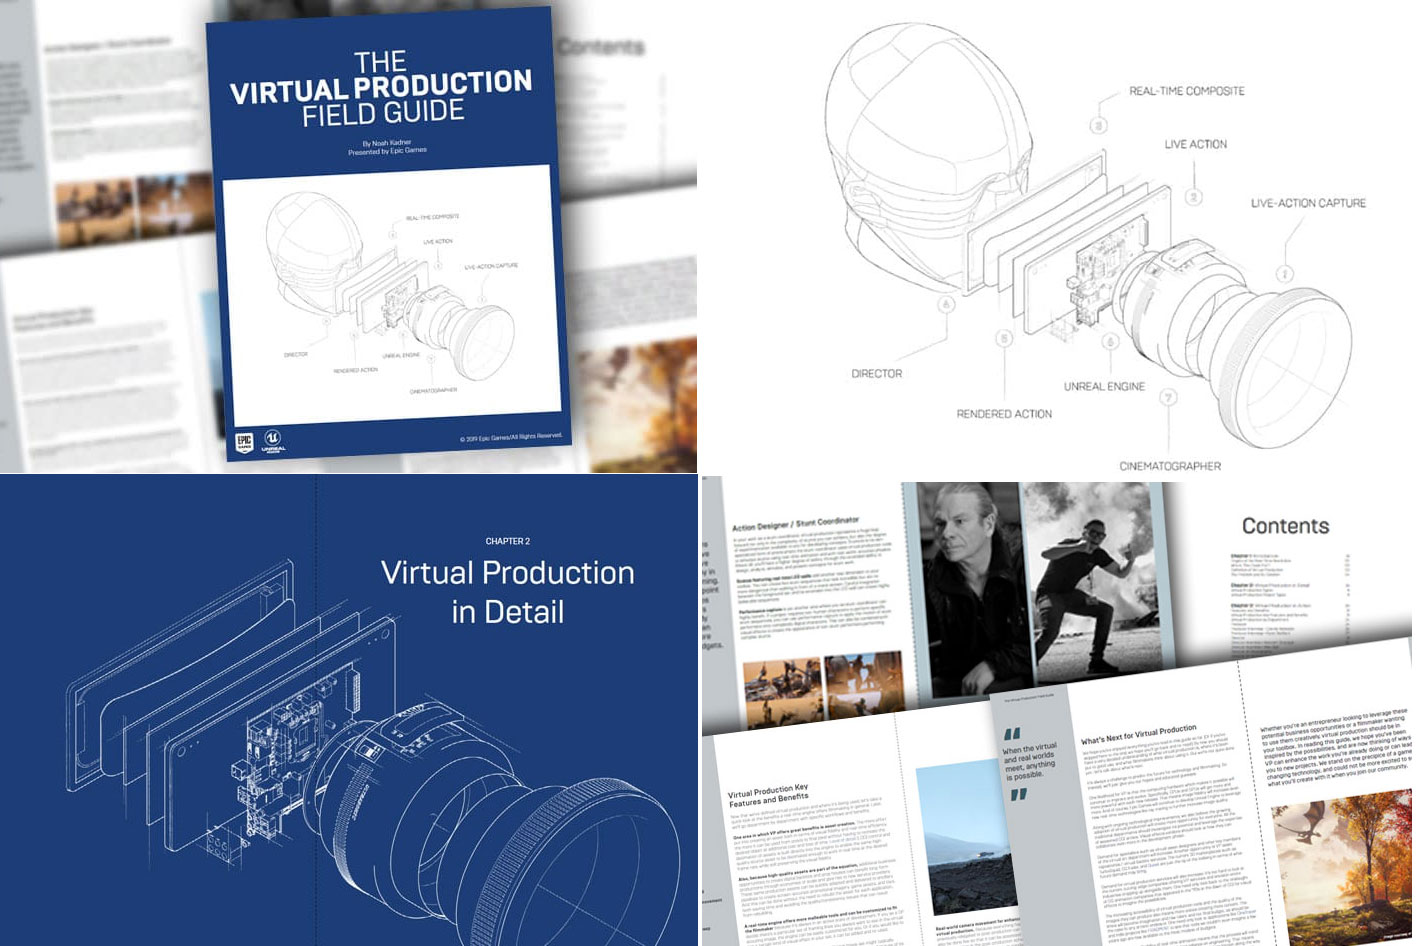 The Virtual Production Field Guide: Epic Games releases Volume 2